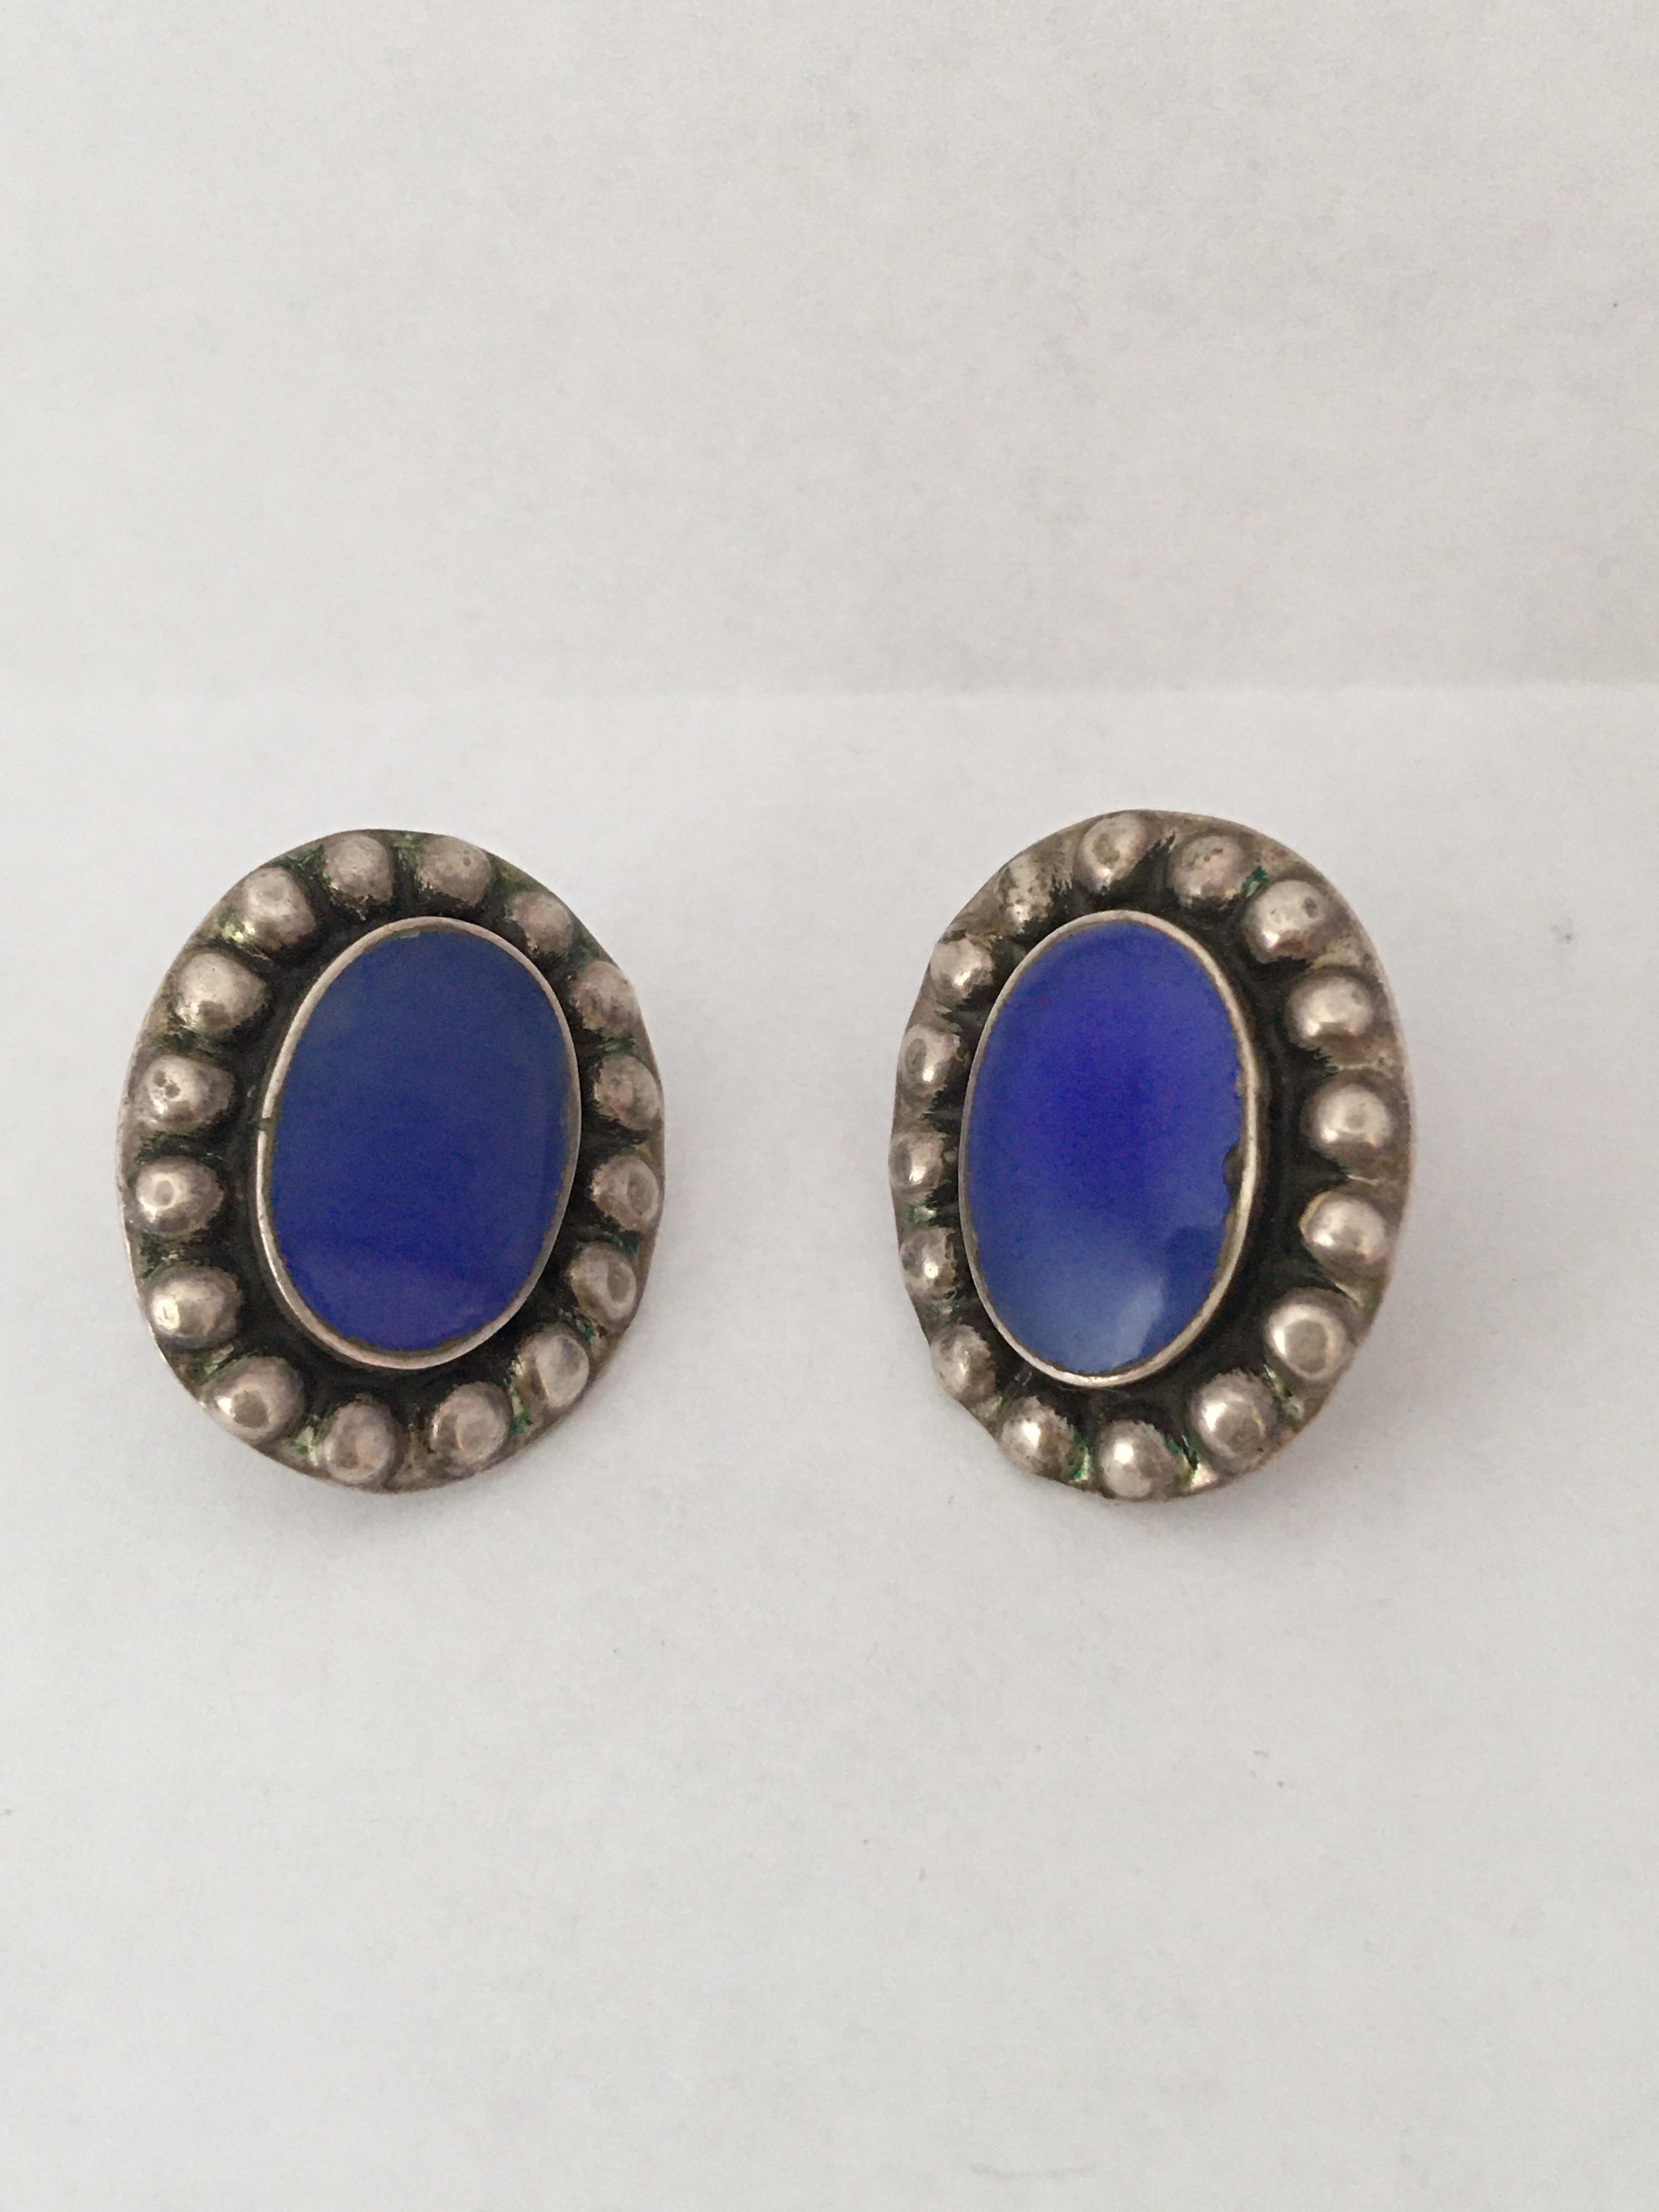 This beautiful pre-owned silver pair of earrings is measured 23mm Length and 19mm width each silver pair. It is a pre-owned vintage condition with scratches and tiny deterioration on the back silver case as shown. 

Please study the images carefully